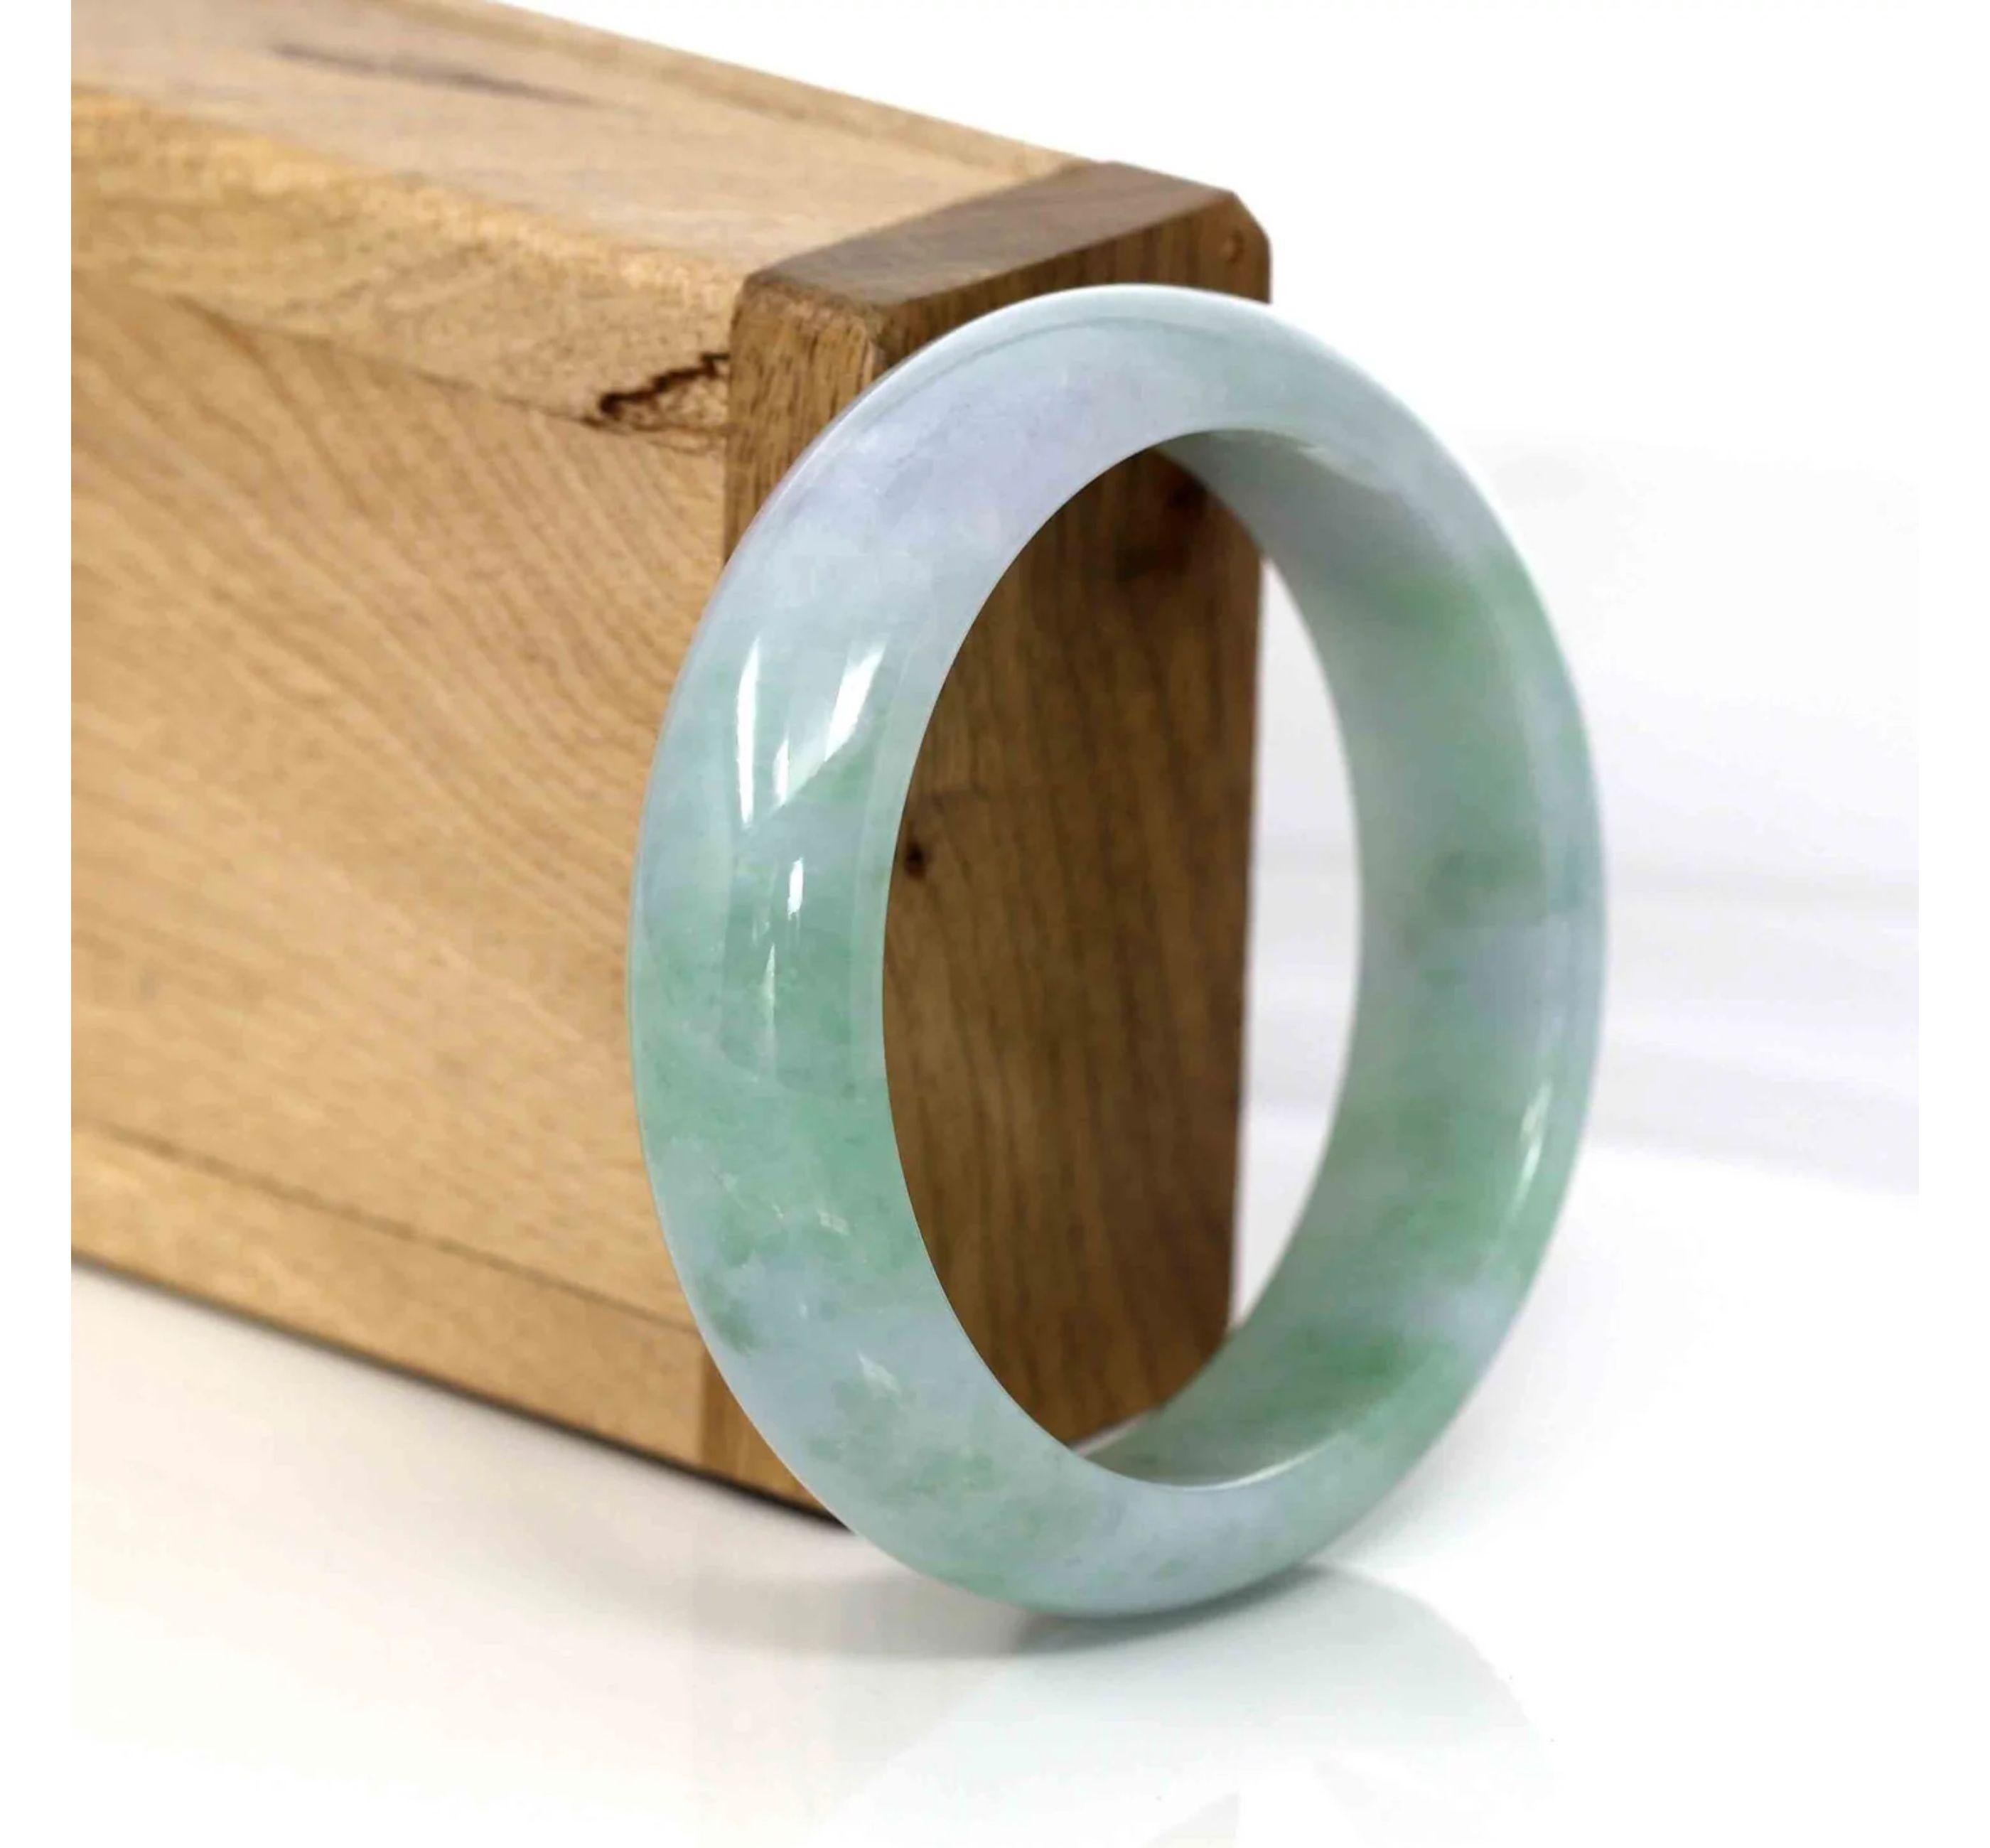  * DETAILS--- This bangle is made with fine genuine Burmese Jadeite jade. The jade texture is very good and smooth with green, lavender colors. and very translucent. It's a perfect with the classic half-round comfort style bracelet. It's a very